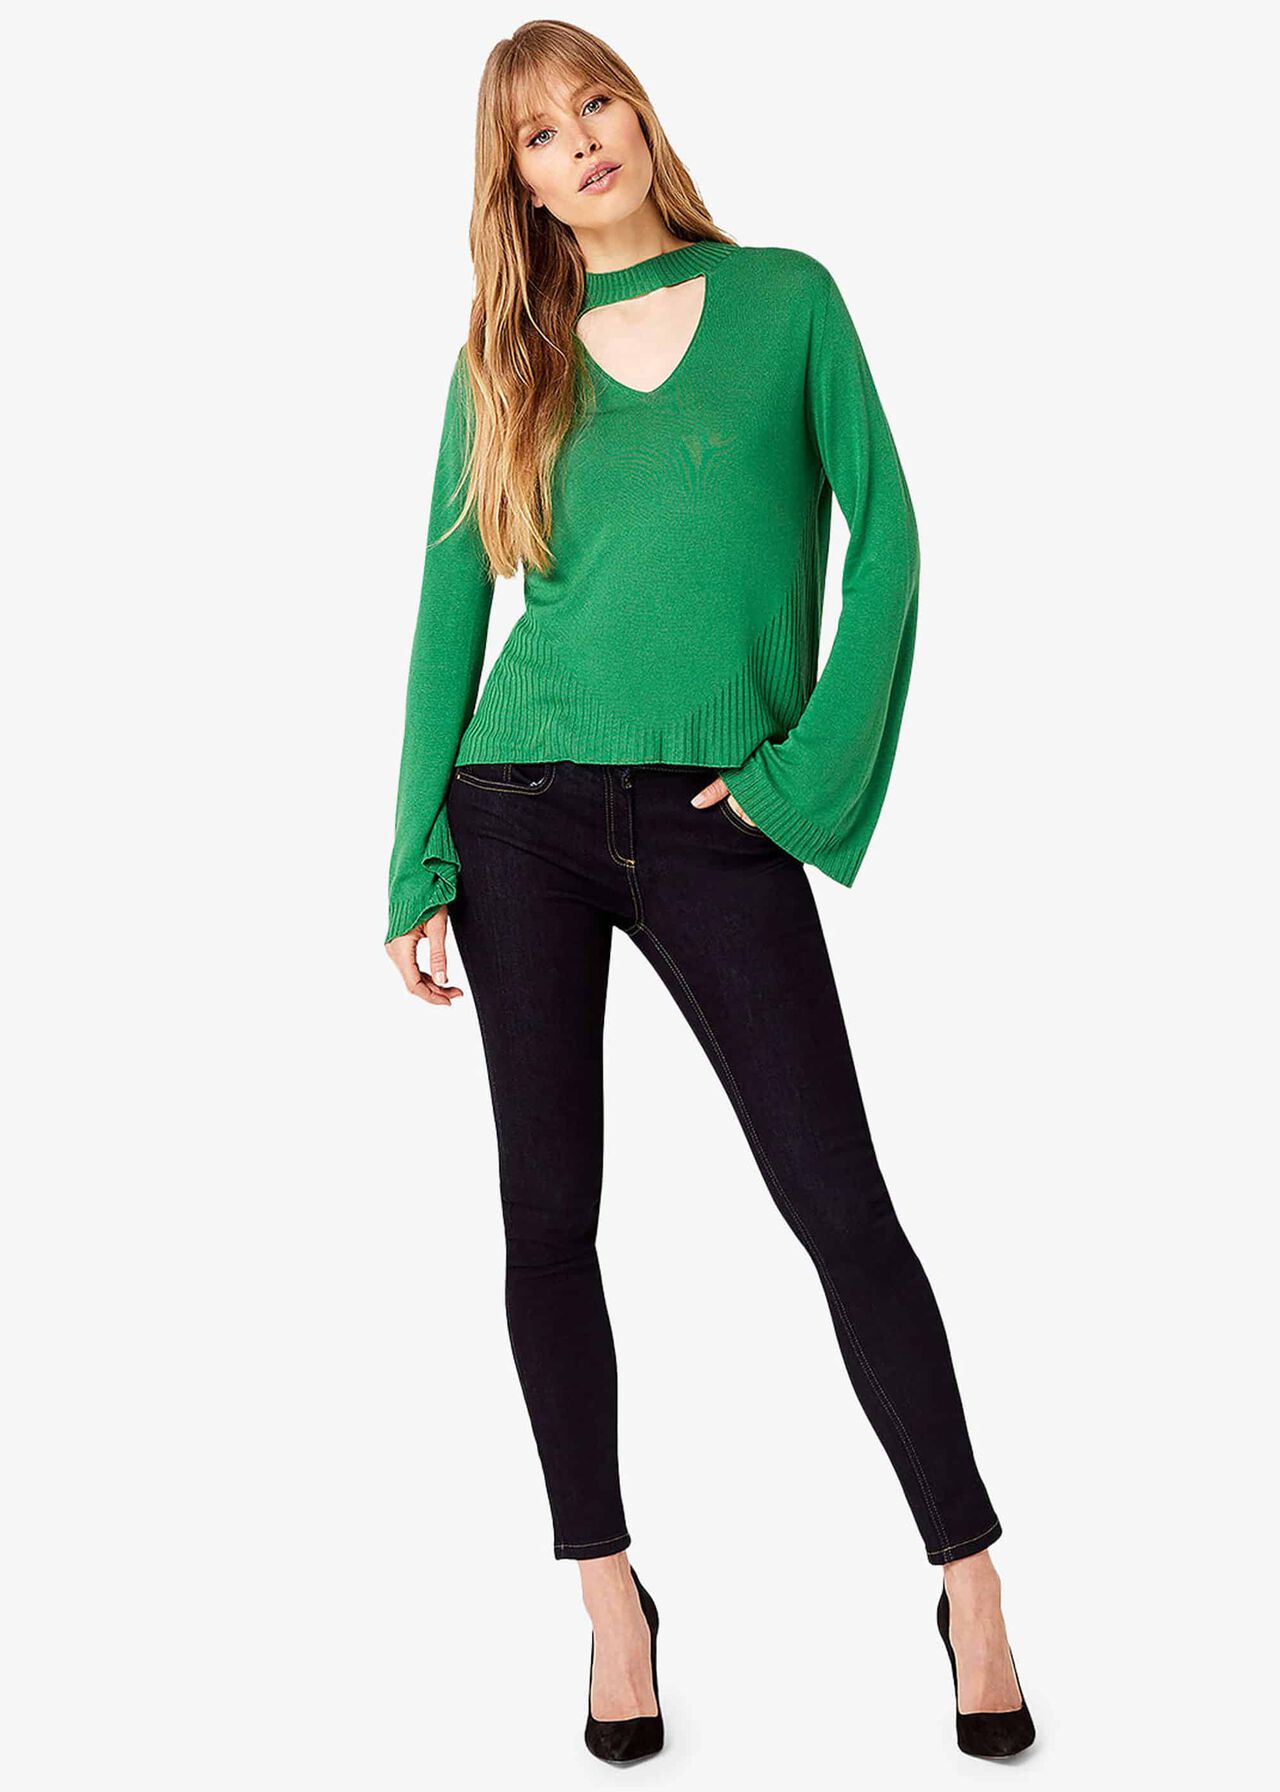 Reese Cut Out Knit Jumper